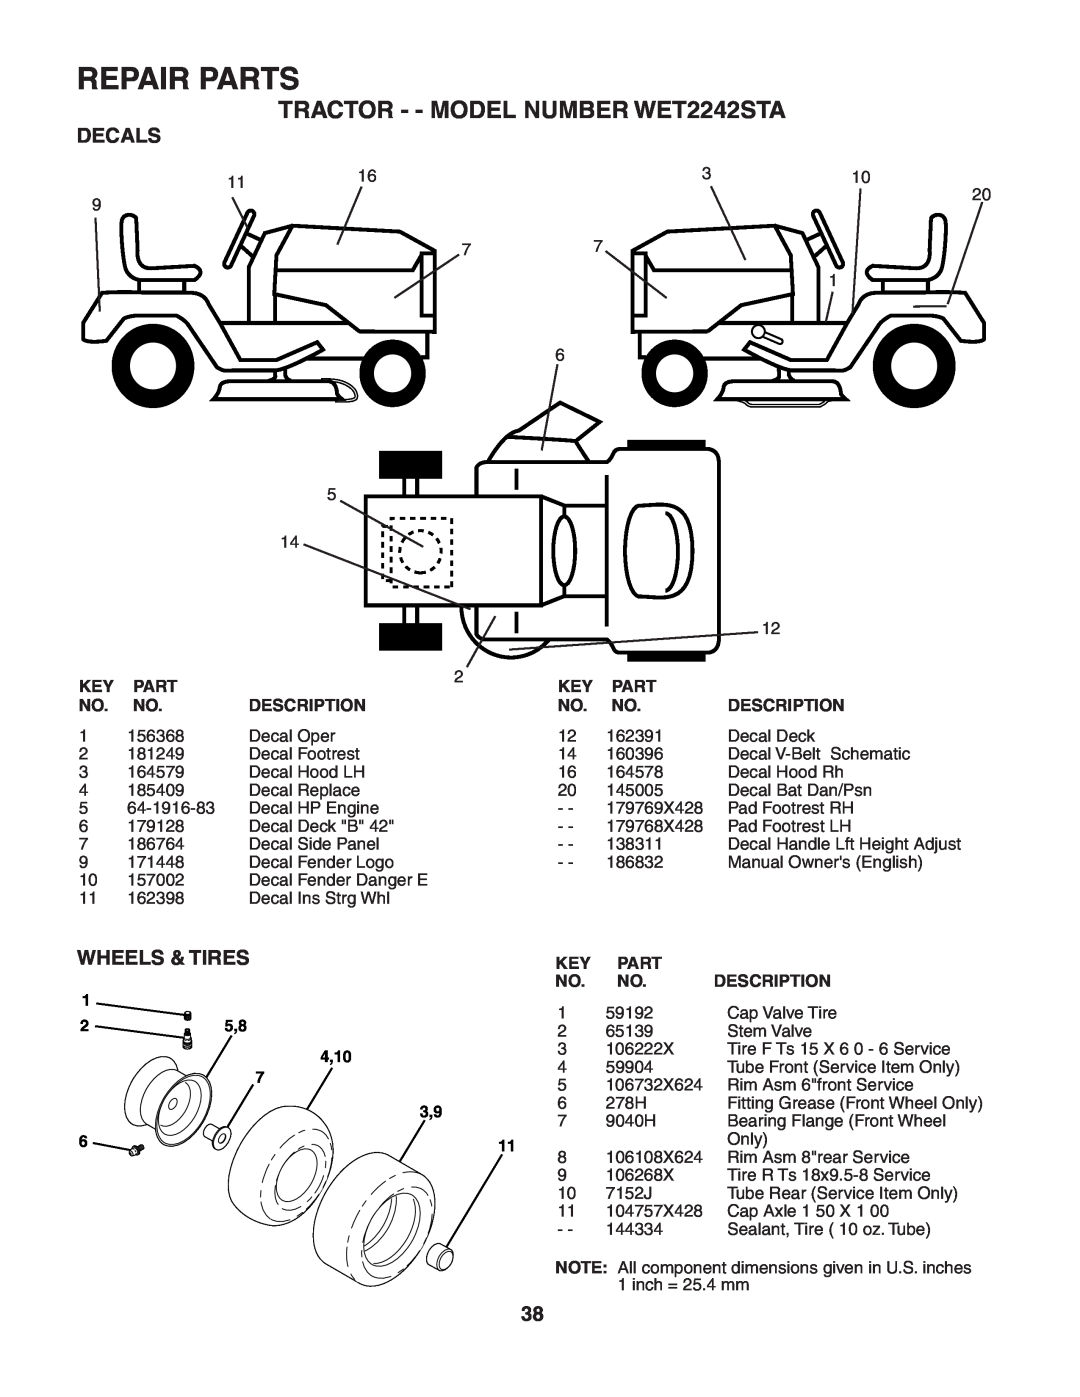 Weed Eater manual Decals, Wheels & Tires, Repair Parts, TRACTOR - - MODEL NUMBER WET2242STA 